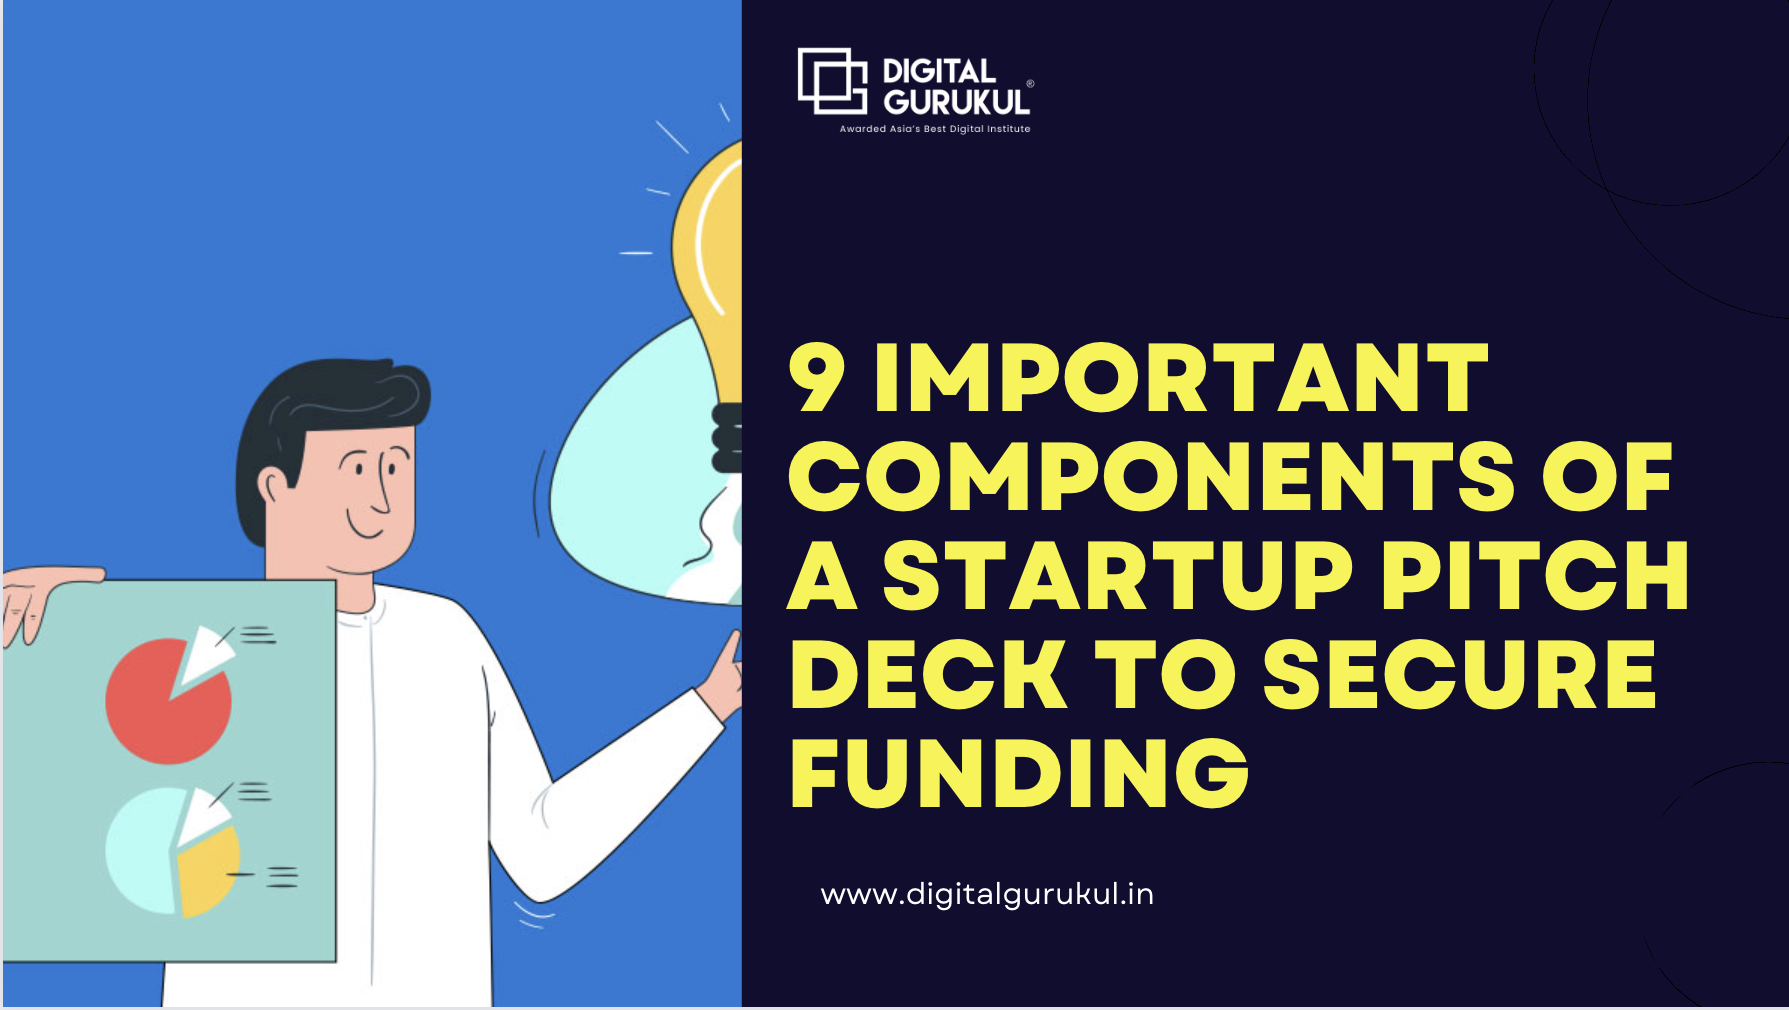 9 important components of a startup pitch deck to secure funding